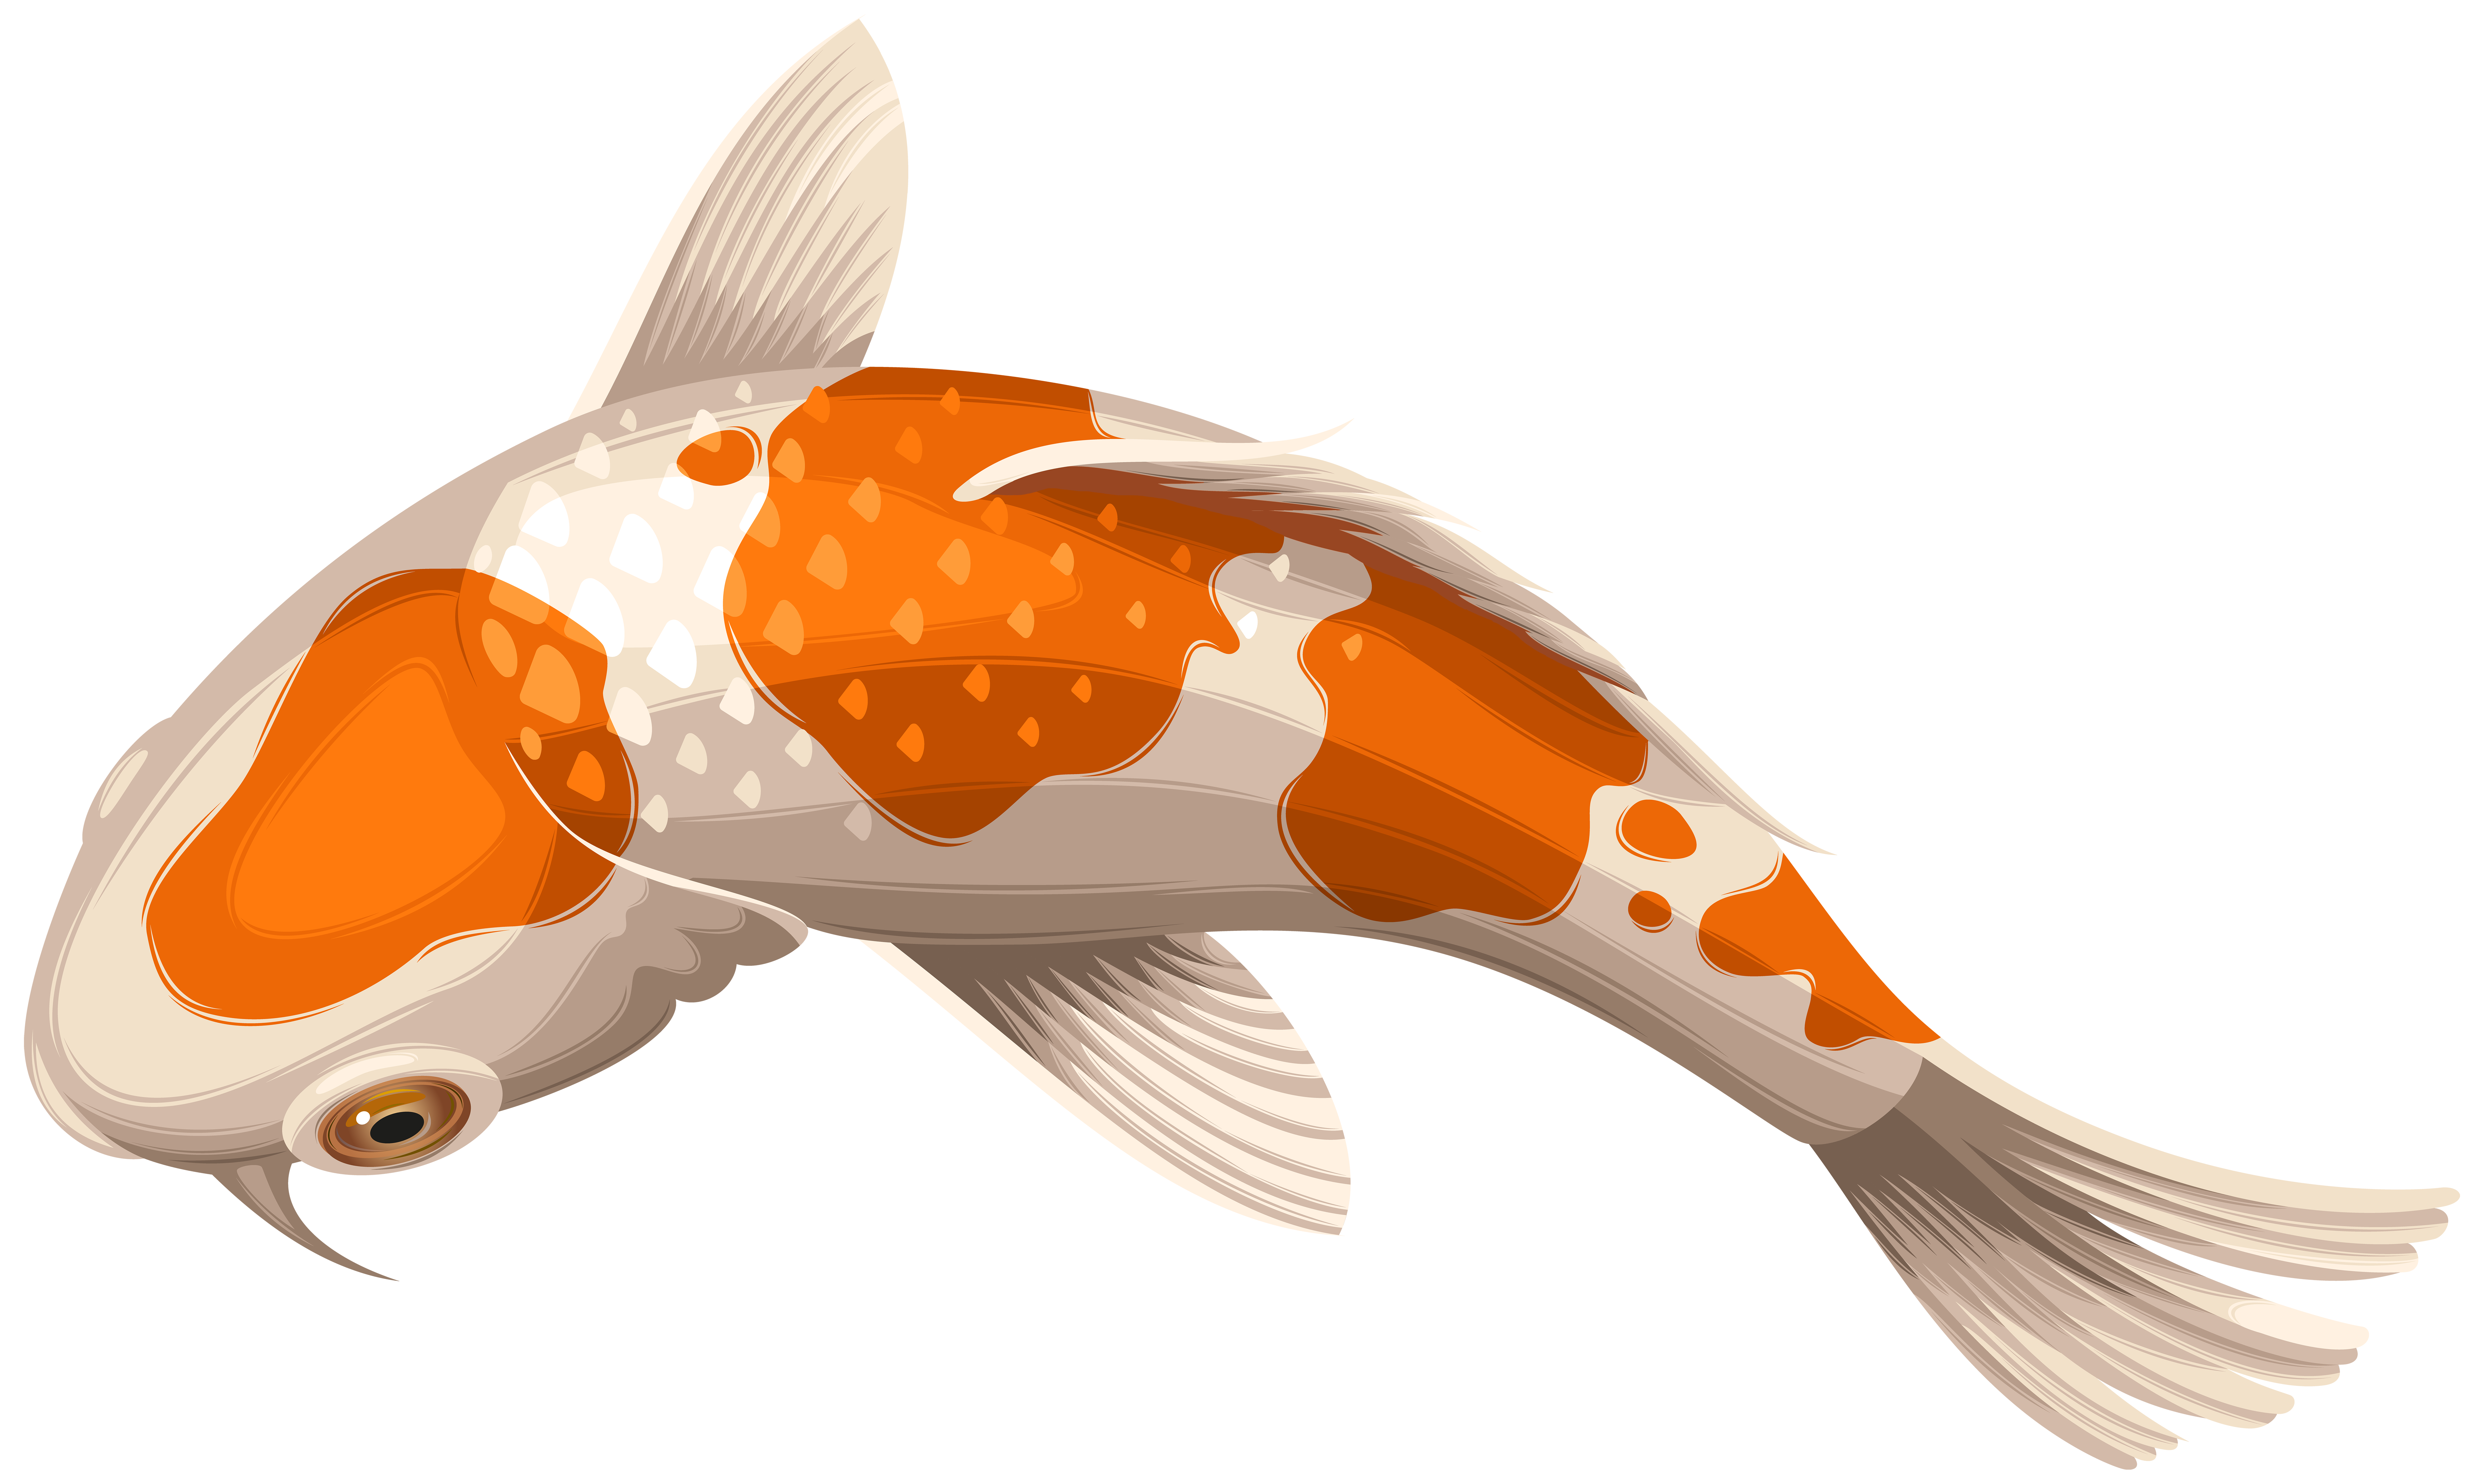 White and Orange Koi Fish Transparent Clip Art PNG Image​  Gallery  Yopriceville - High-Quality Free Images and Transparent PNG Clipart